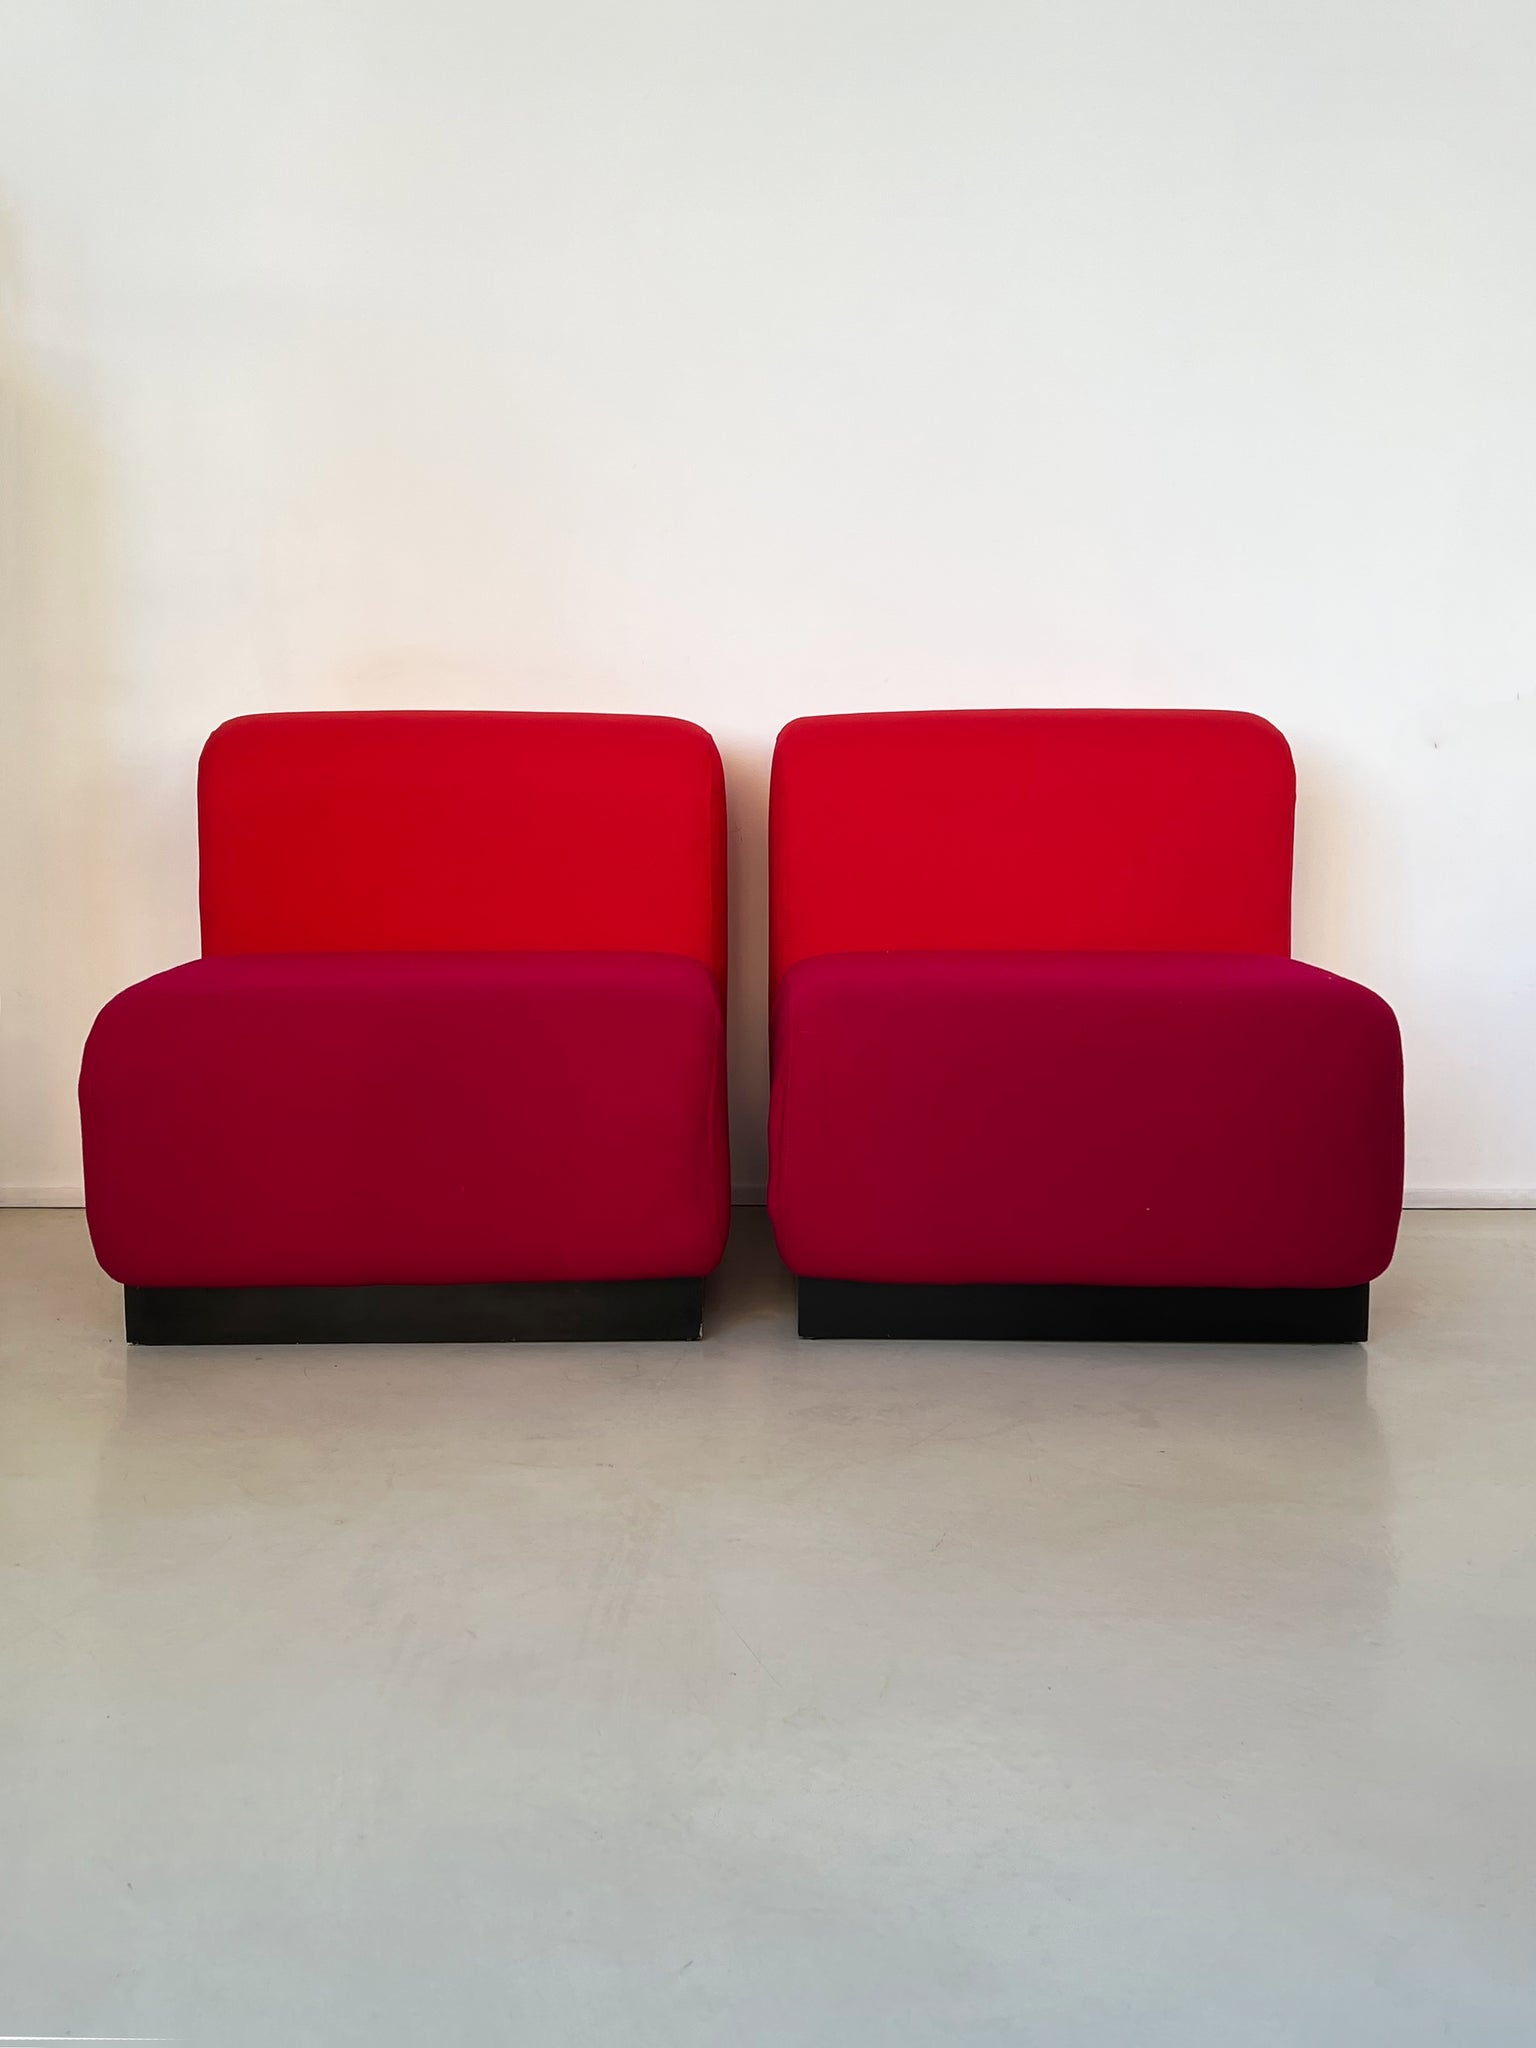 1970s Two-Tone Lounge Chairs